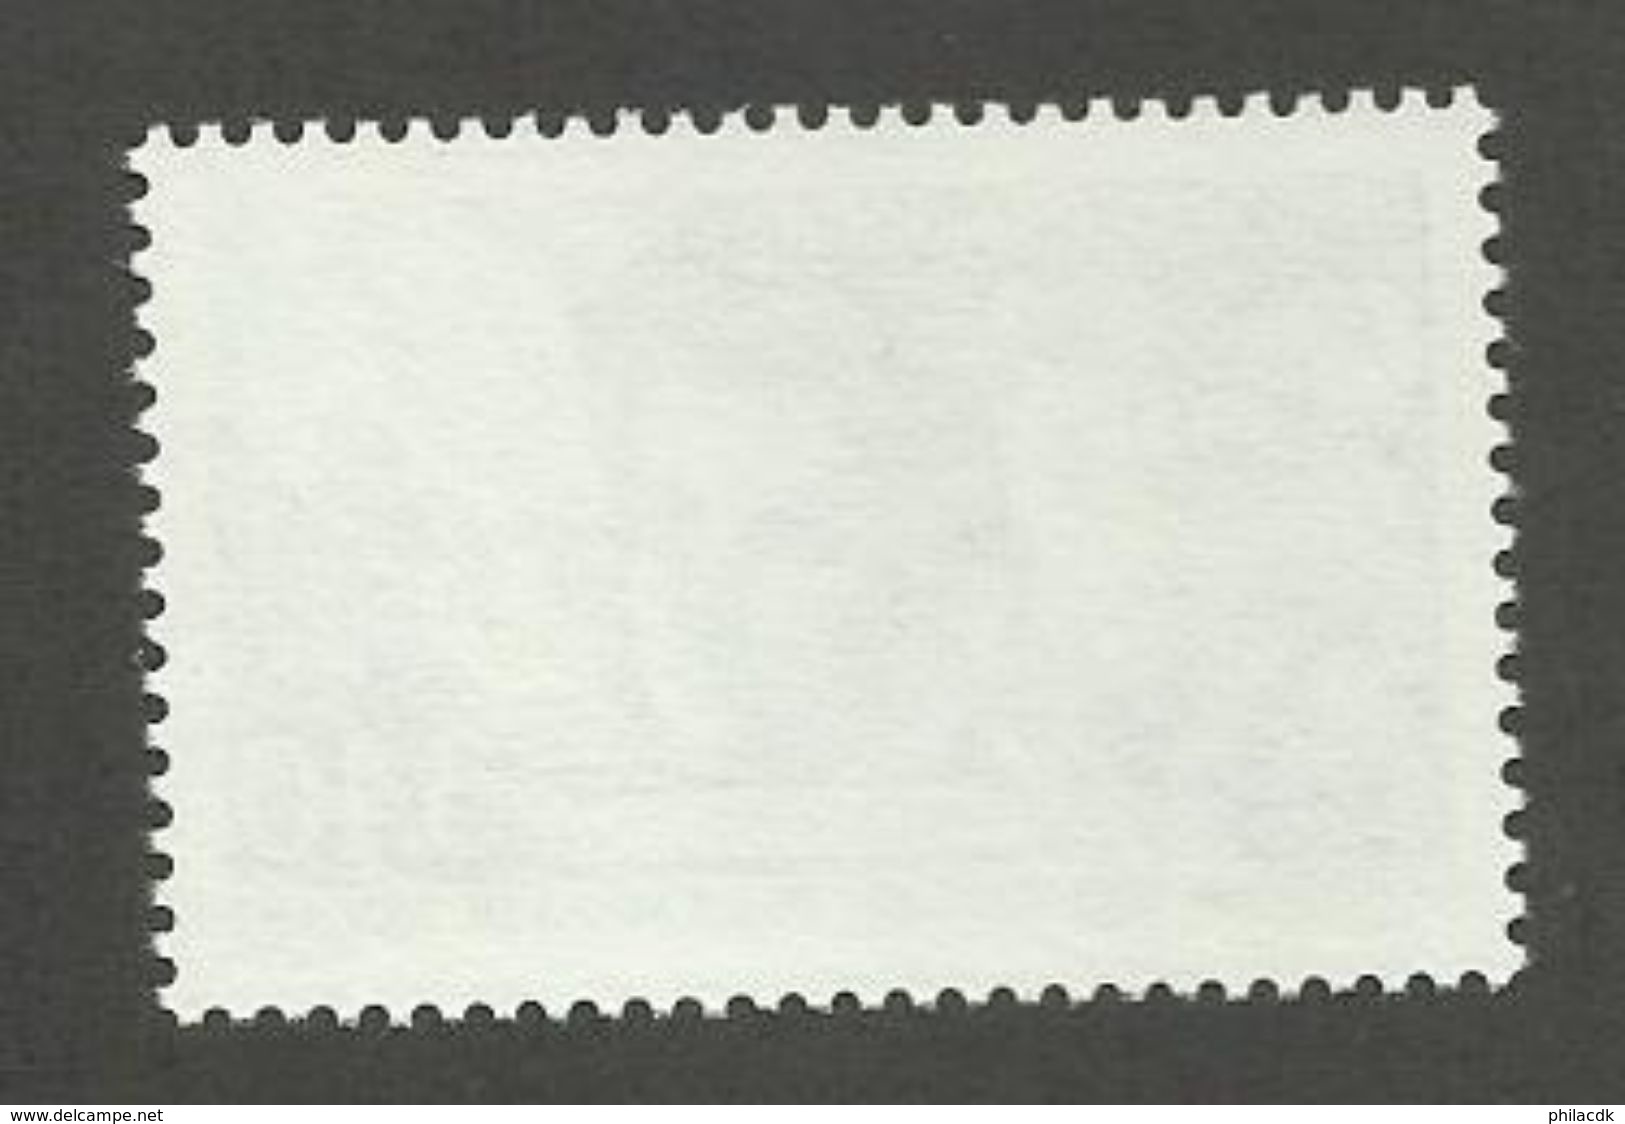 ANDORRE FRANCAIS - N°YT 408 NEUF** LUXE SANS CHARNIERE - COTE YT : 2.10€ - 1991 - Neufs